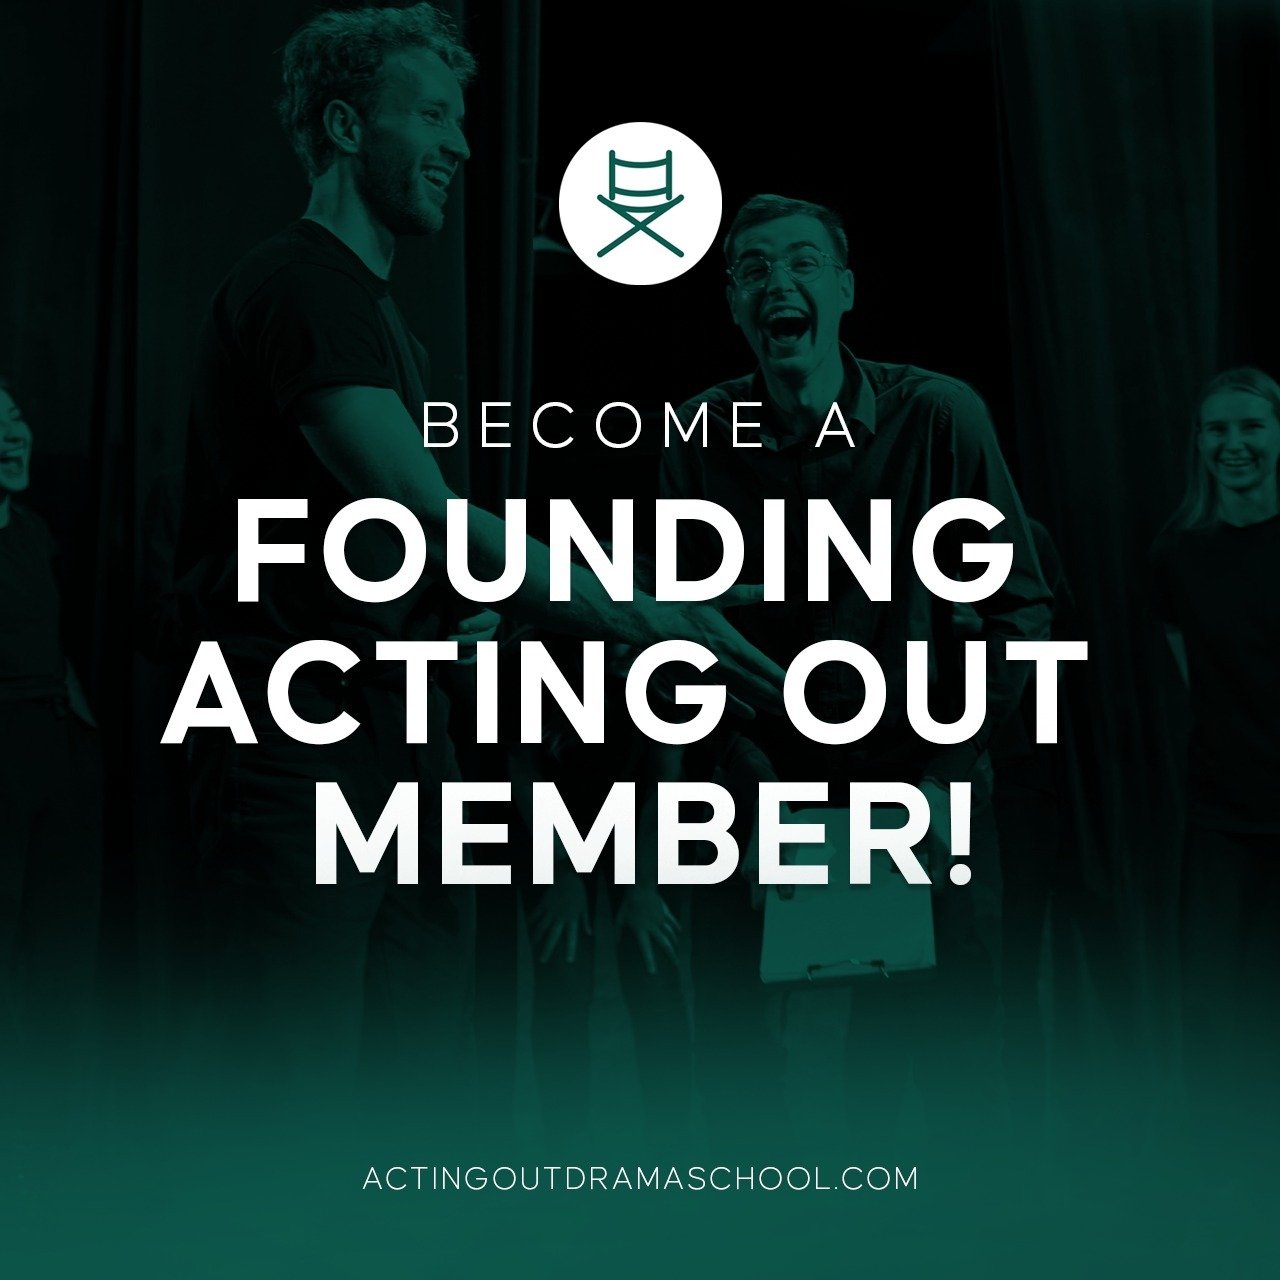 Join our Membership Today for only &pound;19 per month! (founding member limited offer)...

You'll get:

🎭Training
🎭Monthly challenges
🎭Personal feedback
🎭Ongoing support
🎭Q&amp;A sessions
🎭Networking Opportunities

Head to our website for more